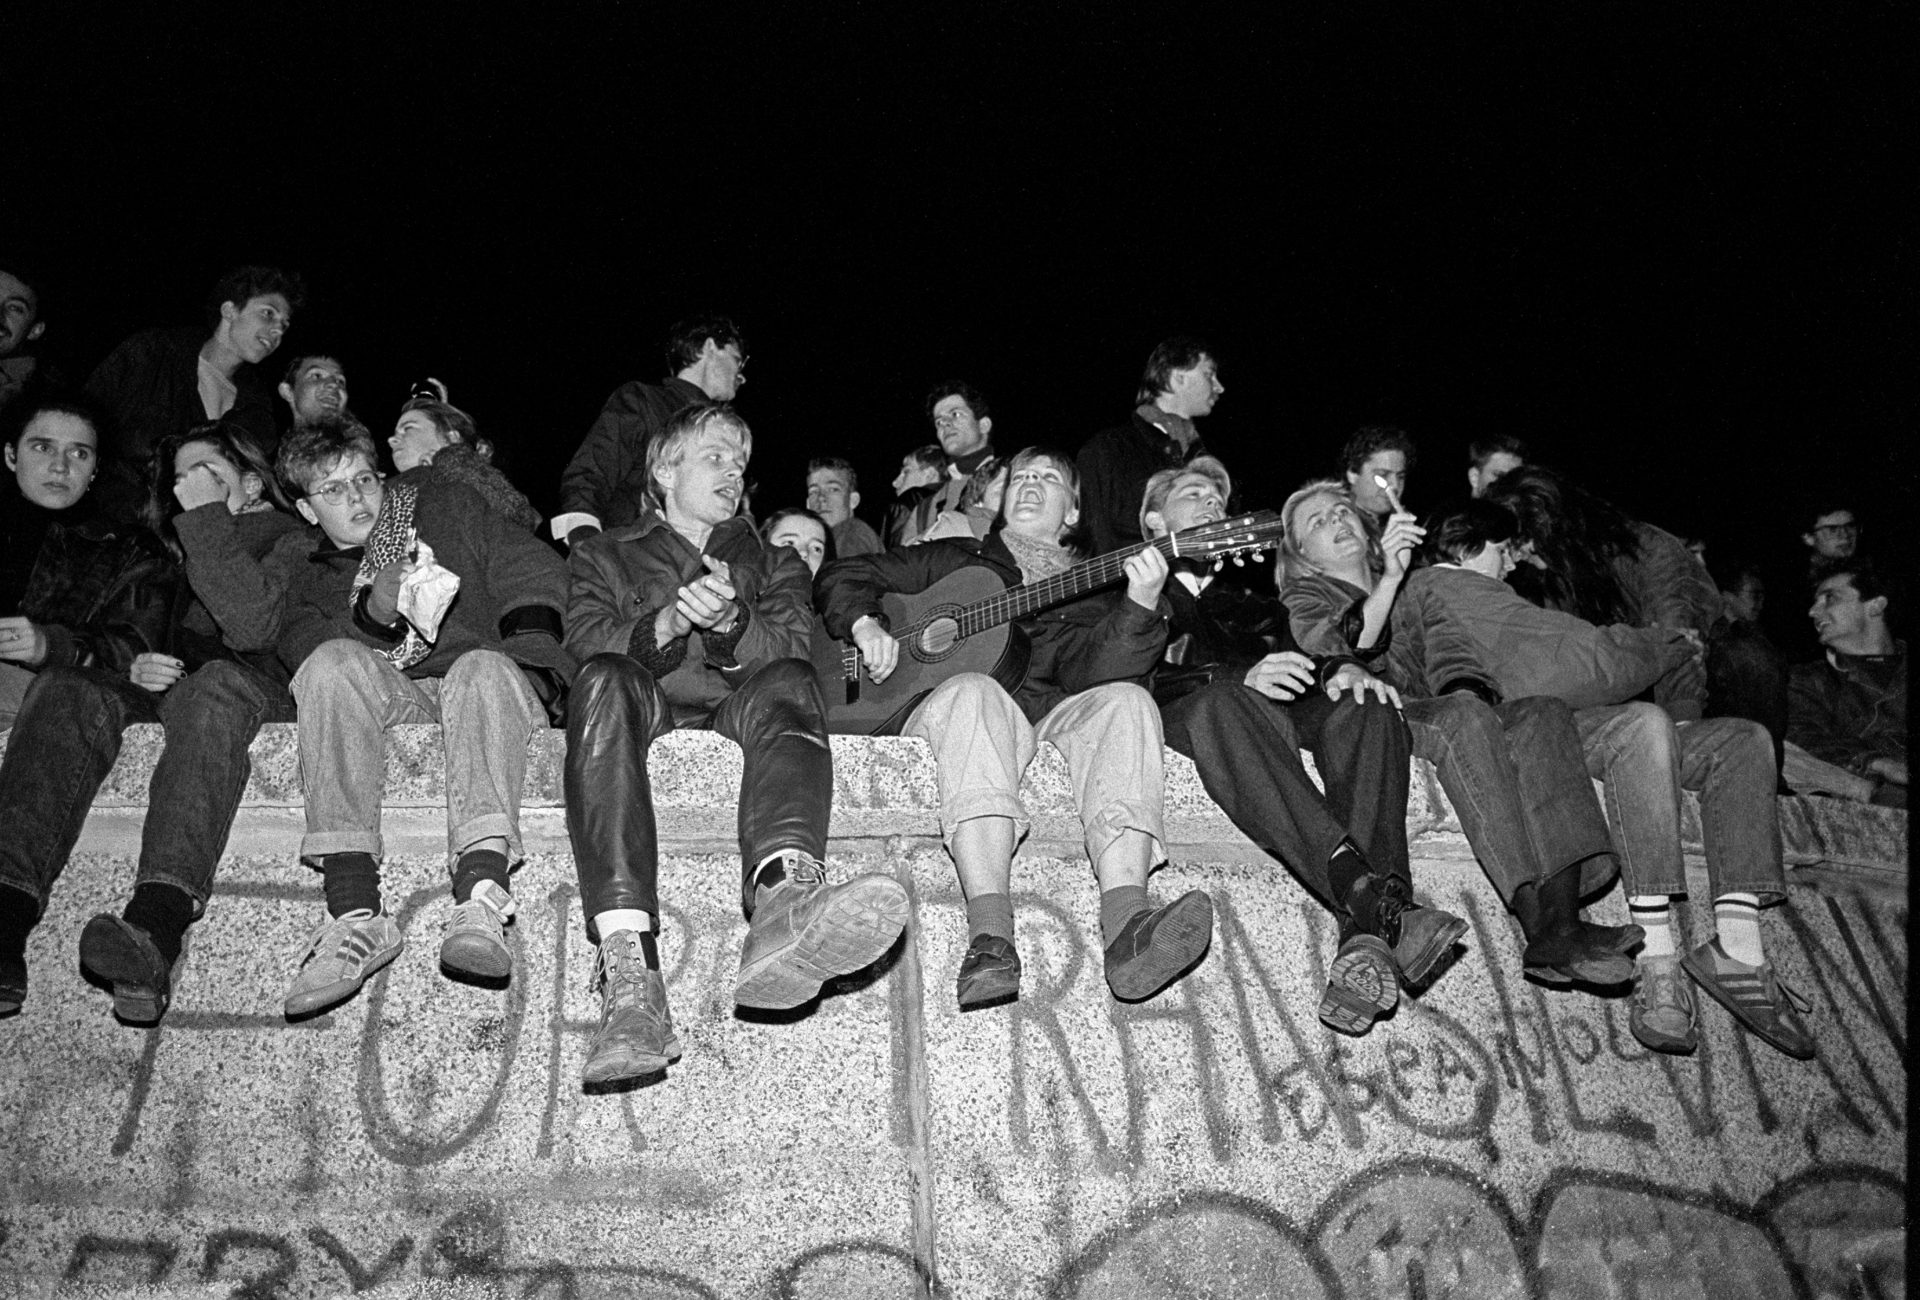 Young Germans singing from atop the Berlin Wall on the evening of November 9, 1989. Photo: ullstein bild via Getty Images.